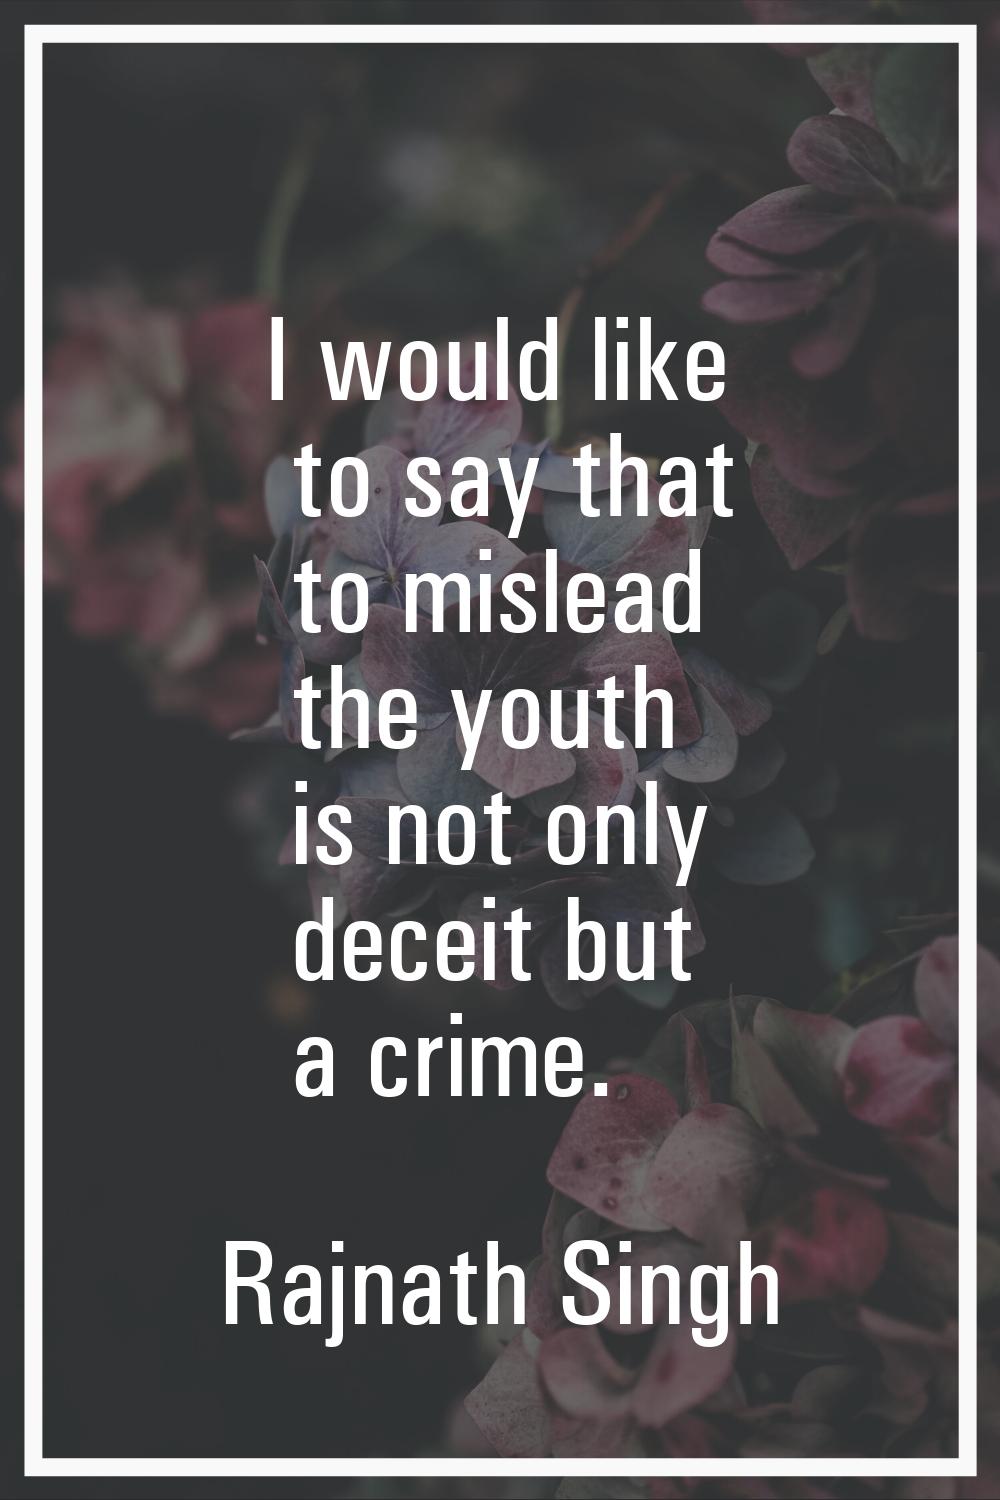 I would like to say that to mislead the youth is not only deceit but a crime.